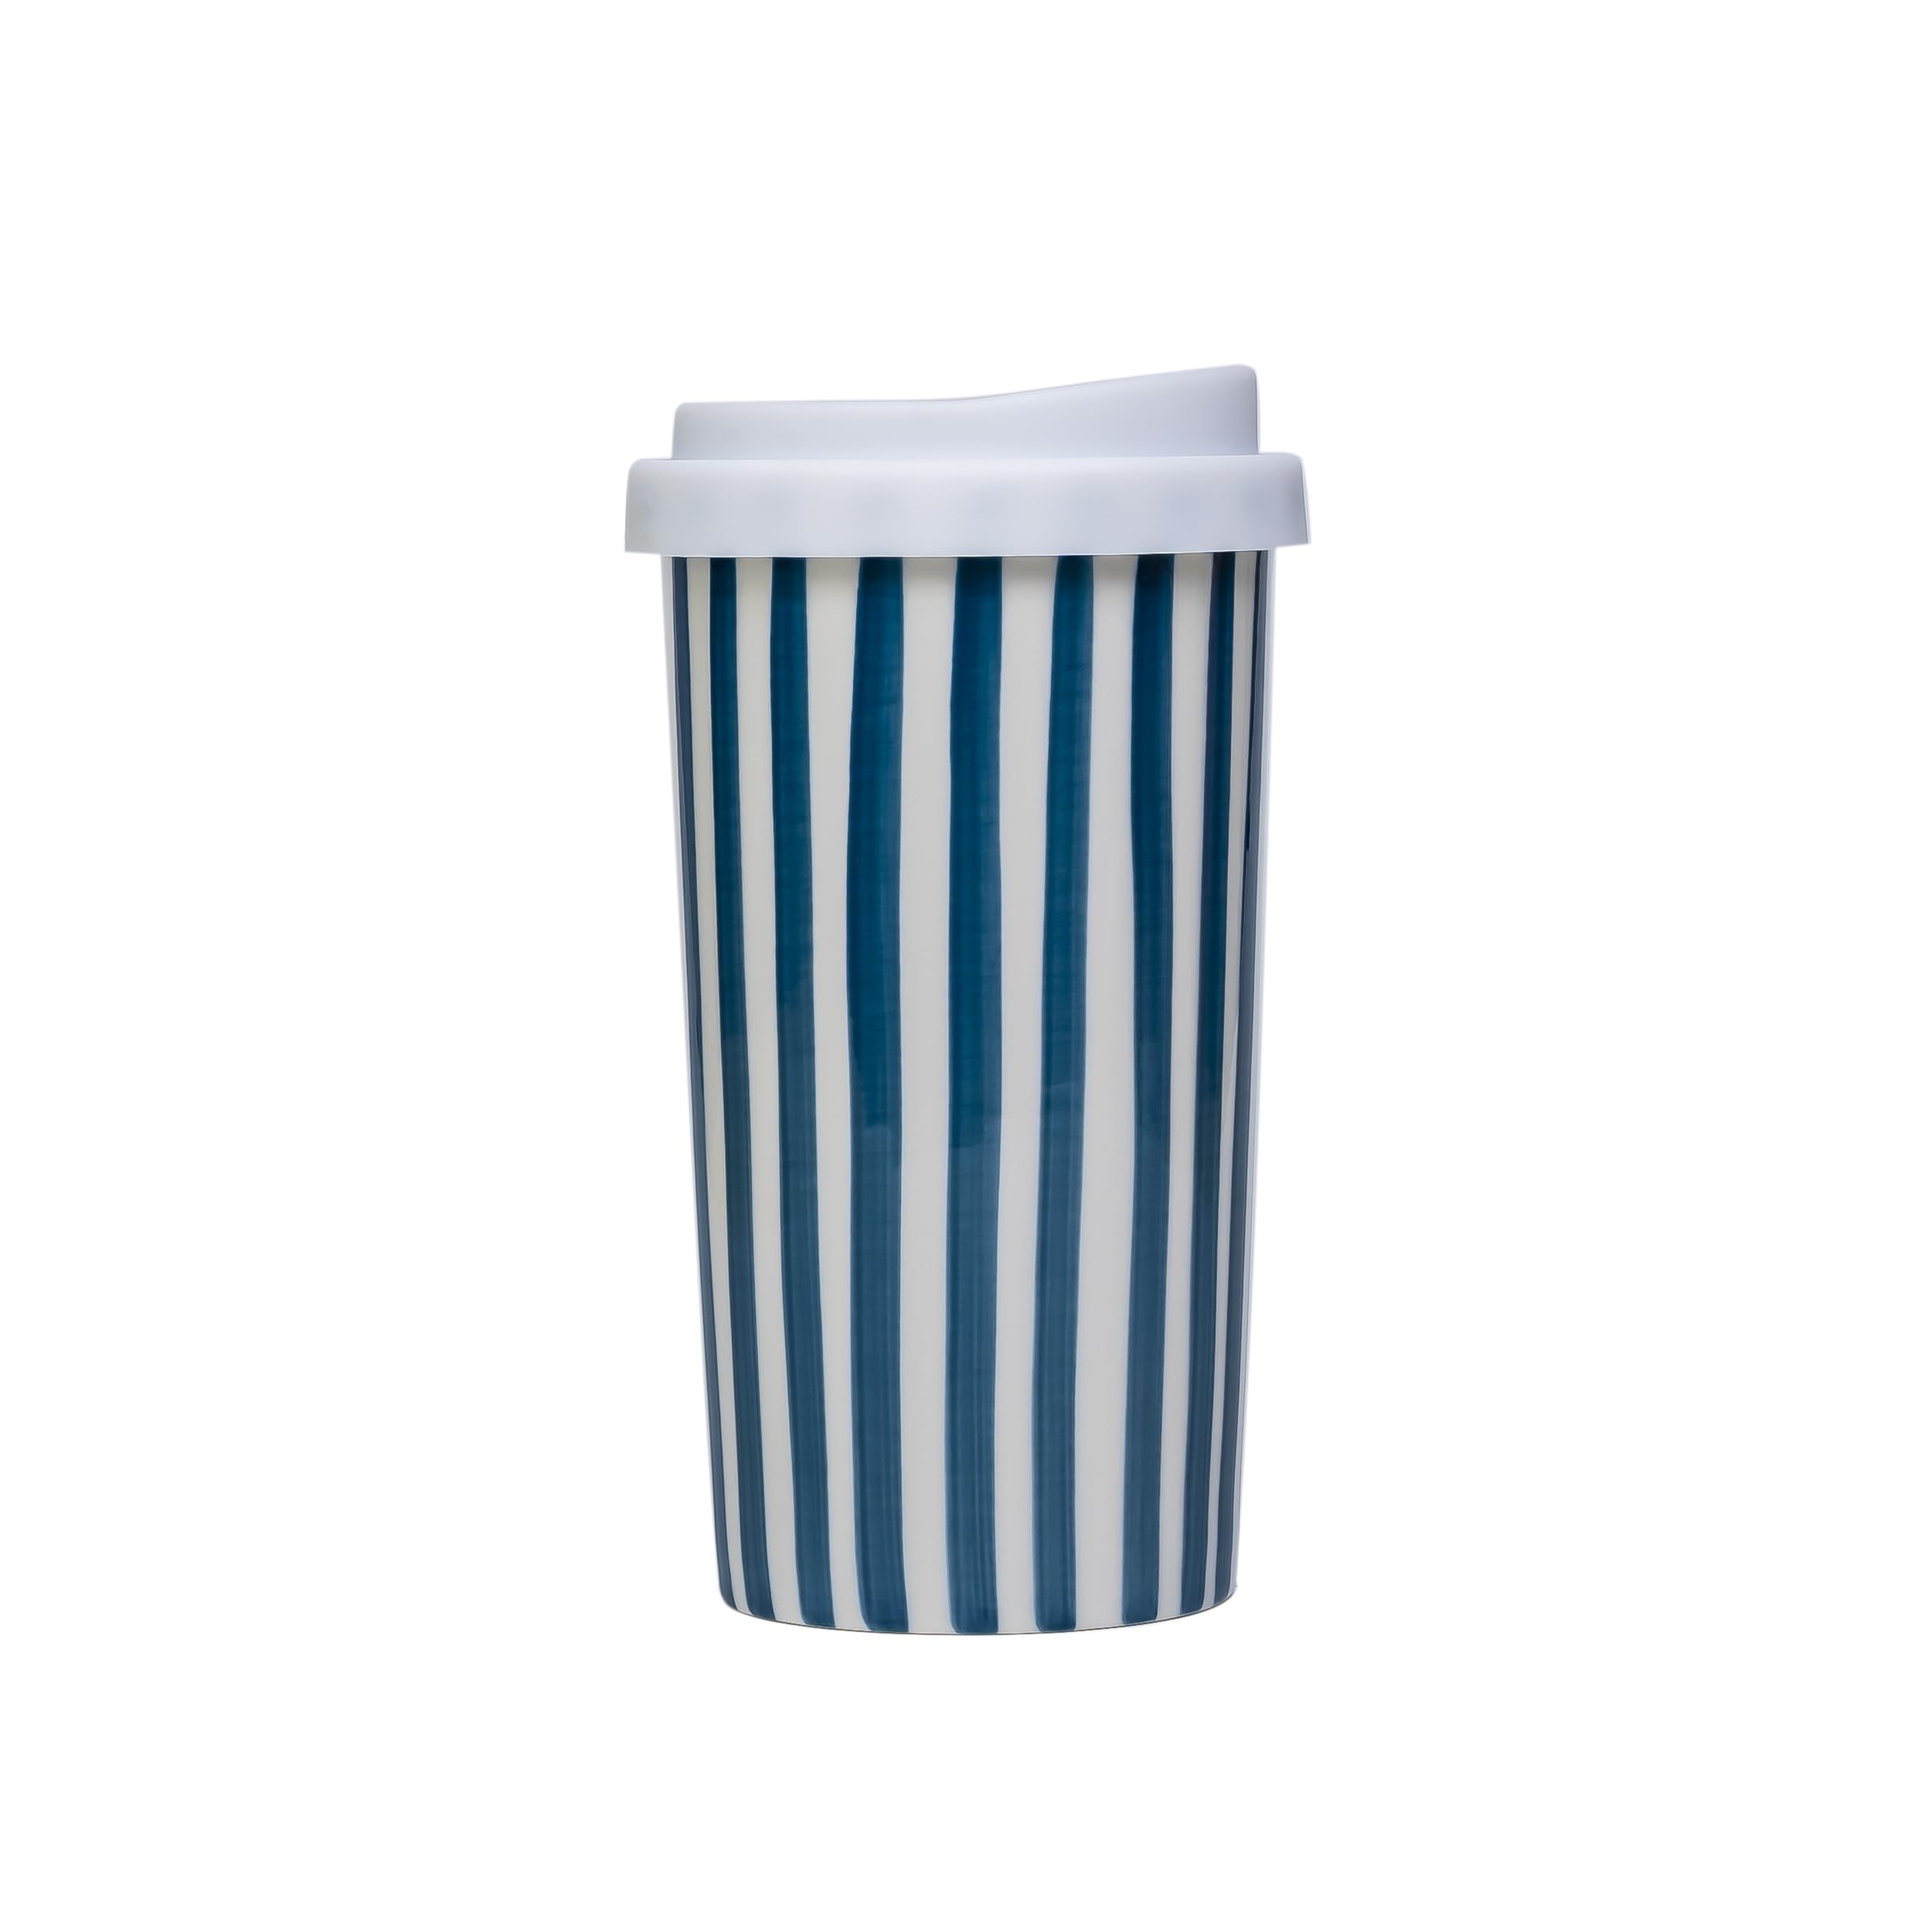 GIROFLIER Millie Ceramic Travel Mug, 12 oz, Blue, Reusable Coffee Cup with Lid, Microwave and Dishwasher Safe